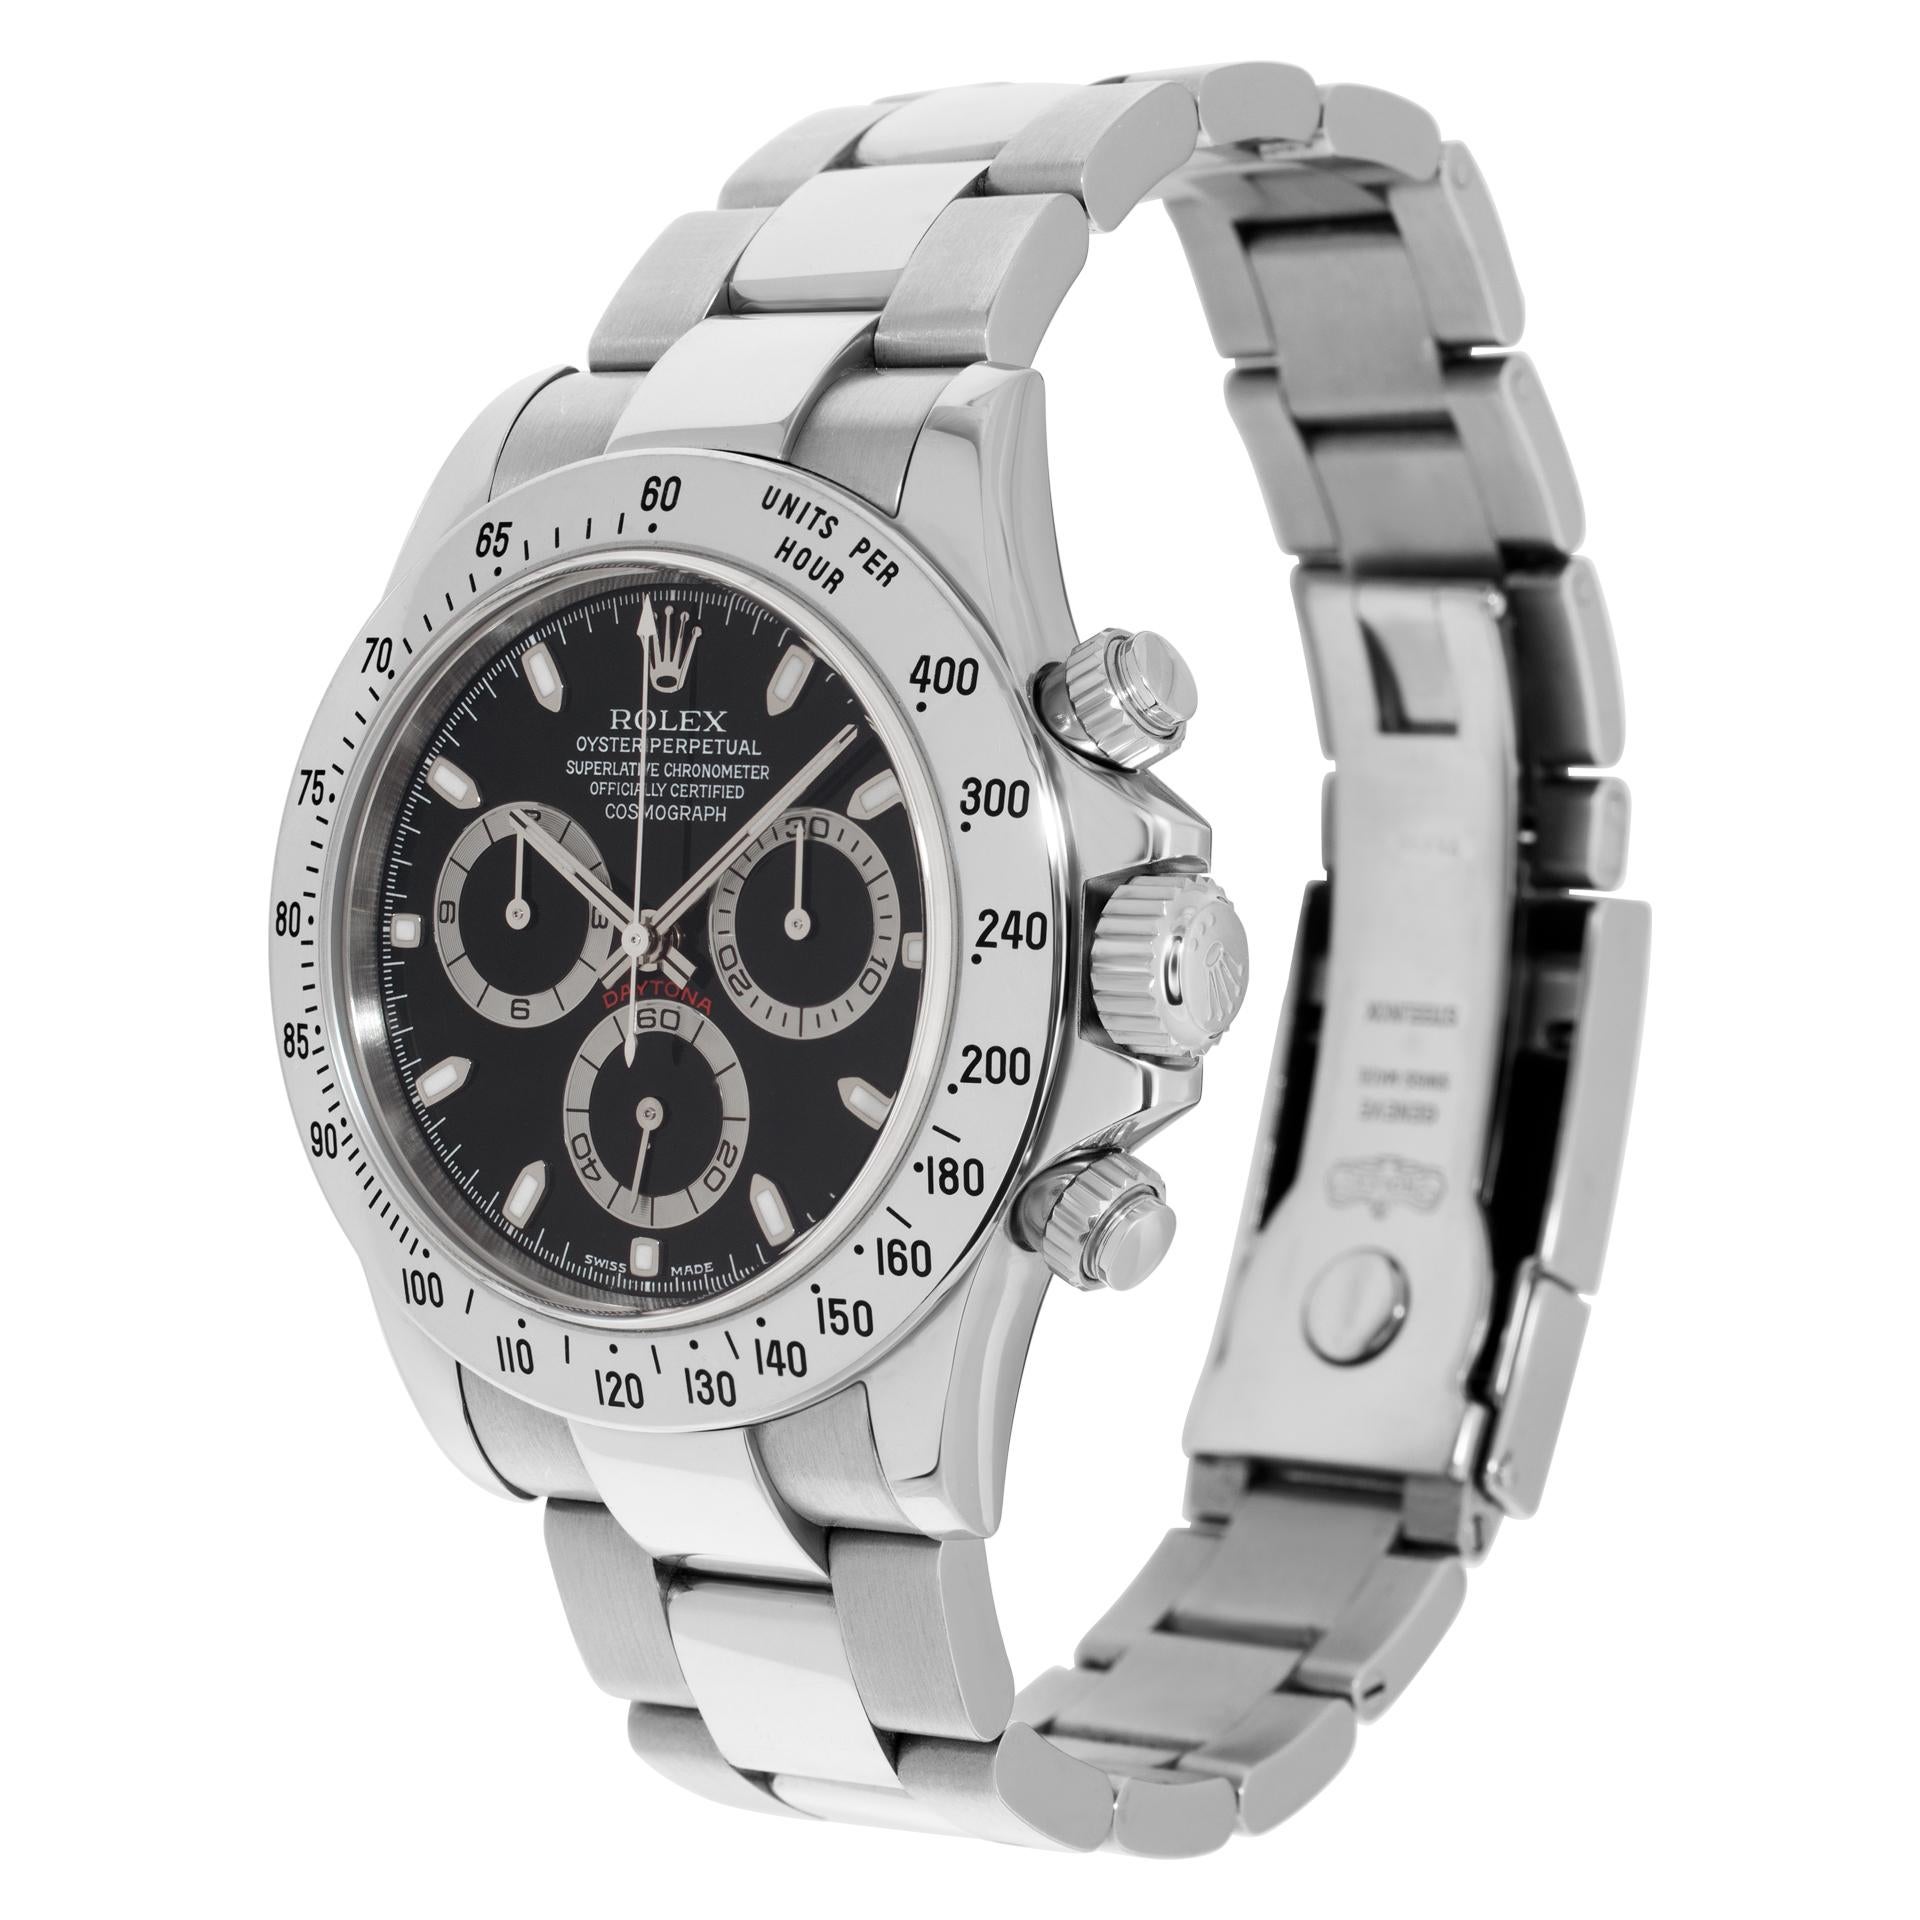 Rolex Daytona in stainless steel. Auto w/ subseconds and chronograph. 40 mm case size. Circa 2000. **Bank wire only at this price** Ref 116520. Fine Pre-owned Rolex Watch. Certified preowned Sport Rolex Daytona 116520 watch is made out of Stainless